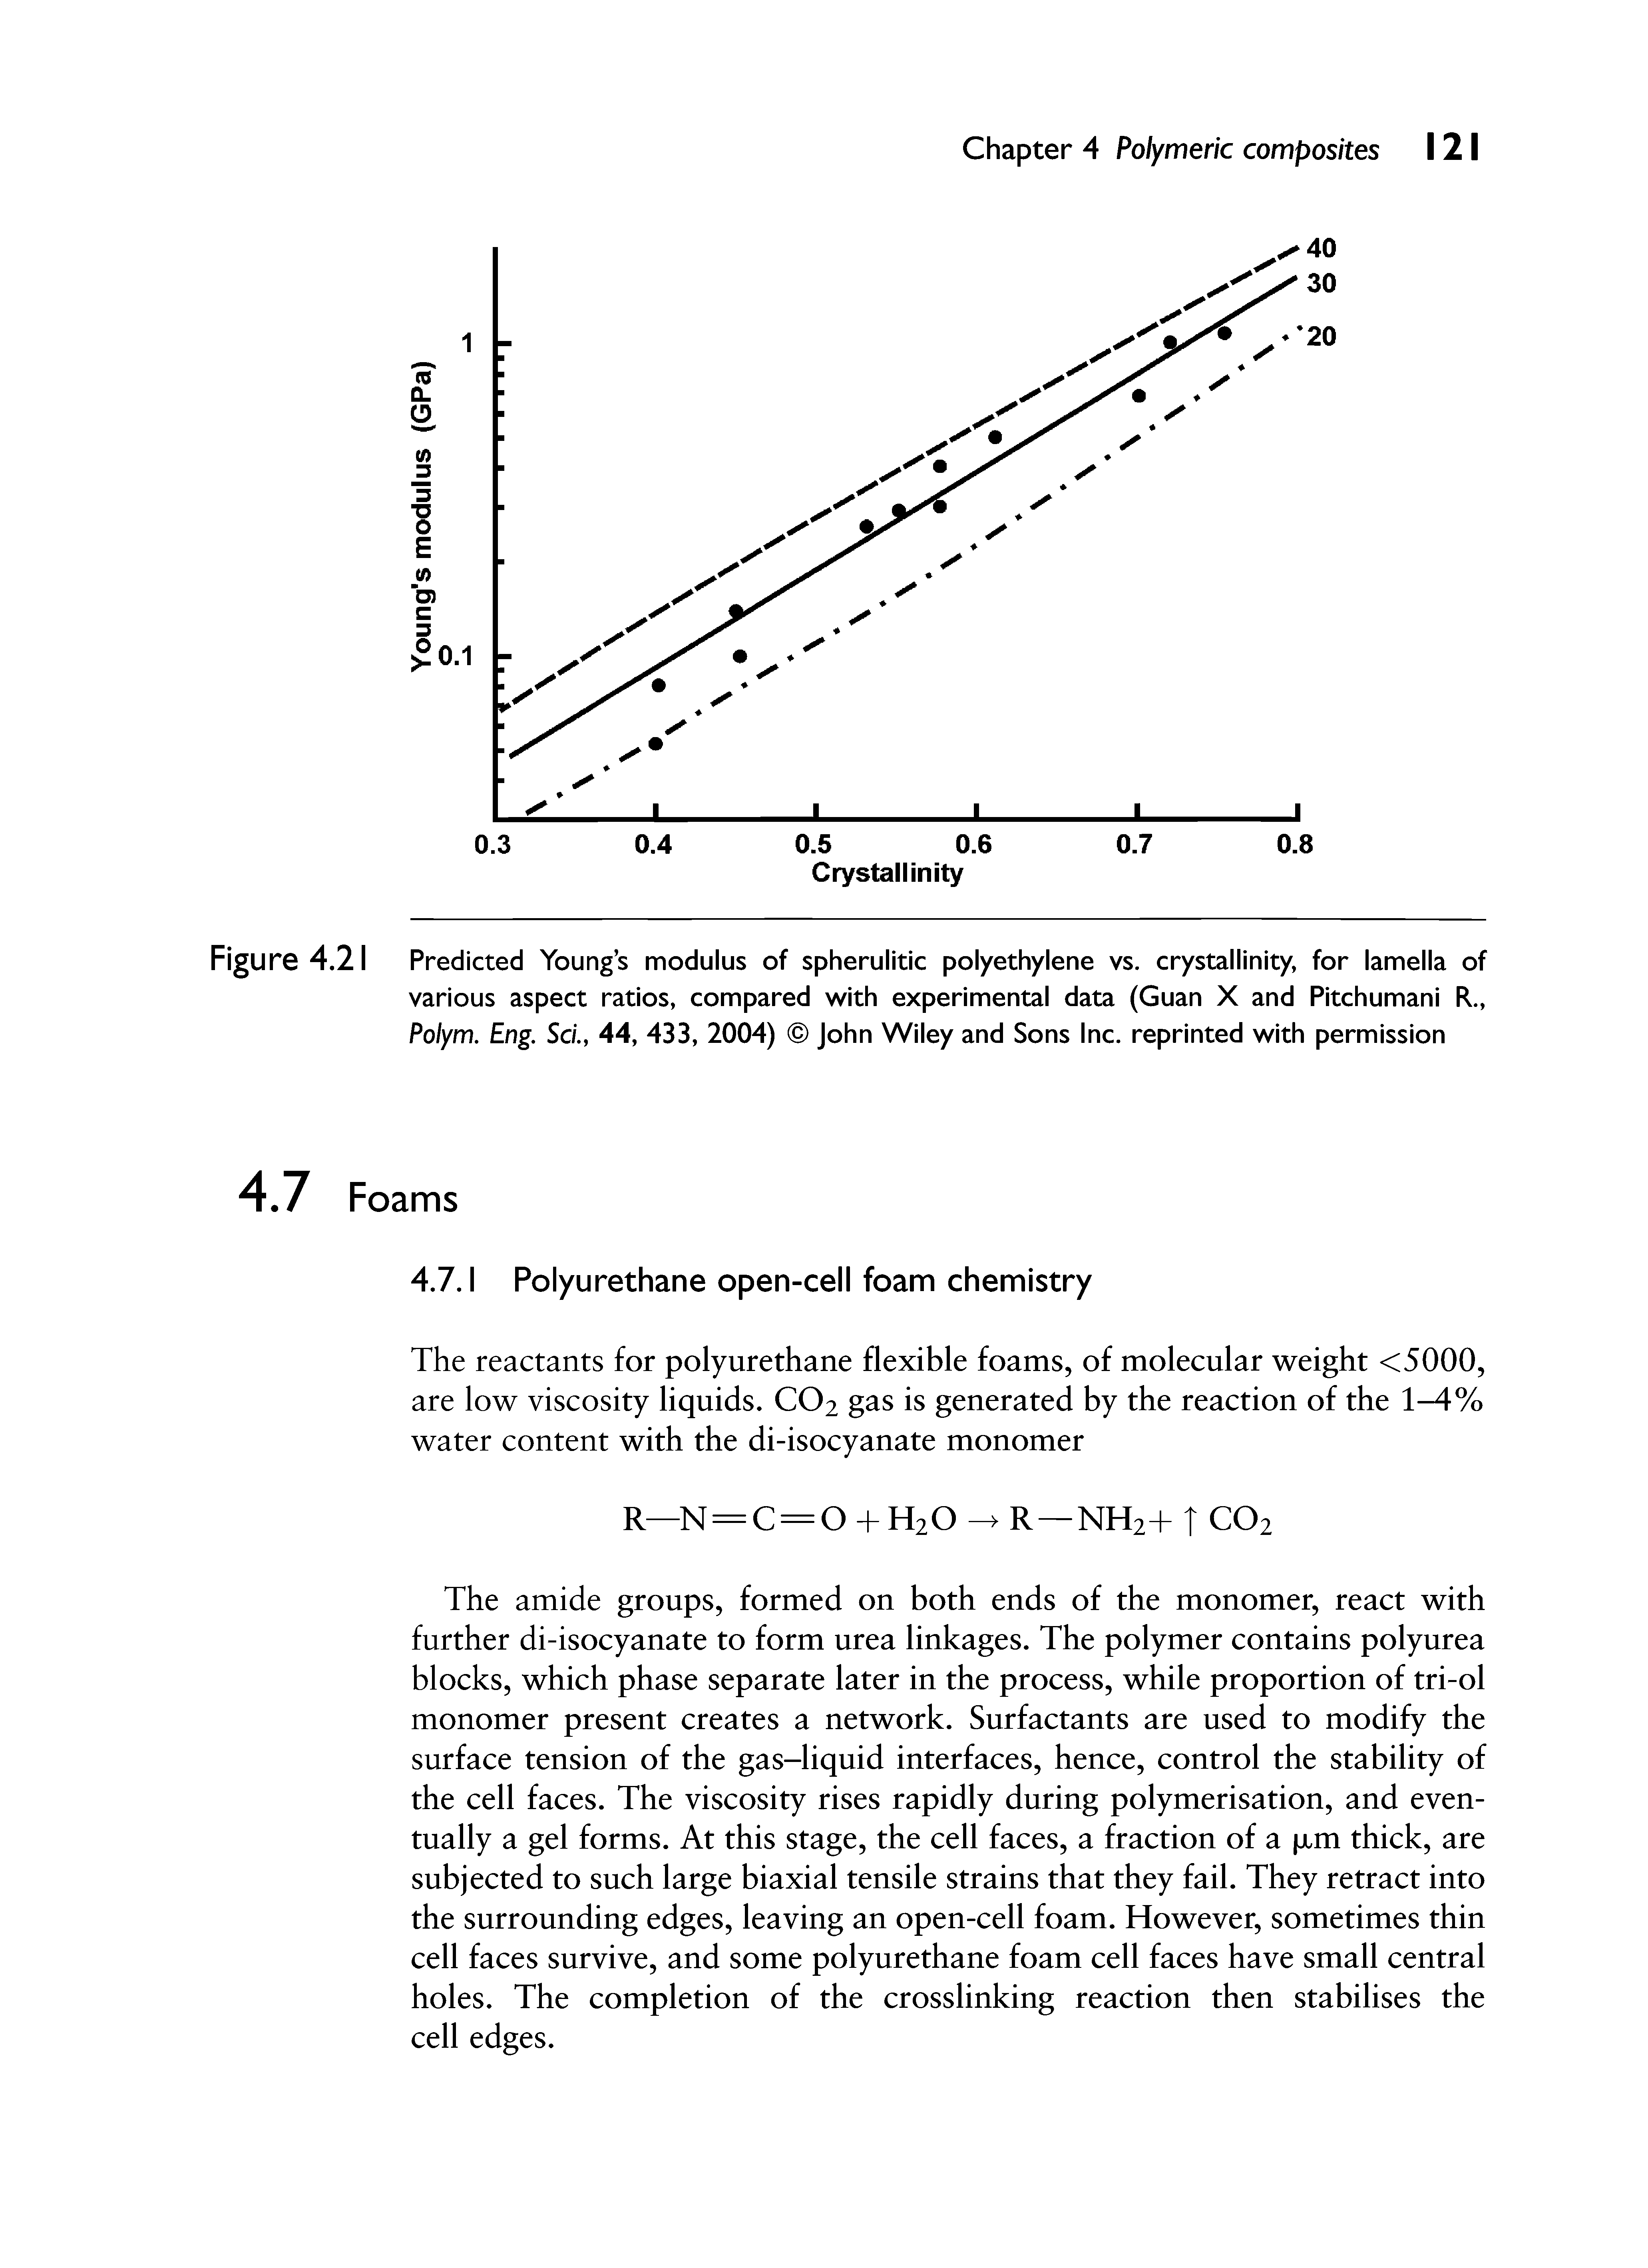 Figure 4.21 Predicted Young s modulus of spherulitic polyethylene vs. crystallinity, for lamella of various aspect ratios, compared with experimental data (Guan X and Pitchumani R., Polym. Eng. Sd, 44, 433, 2004) John Wiley and Sons Inc. reprinted with permission...